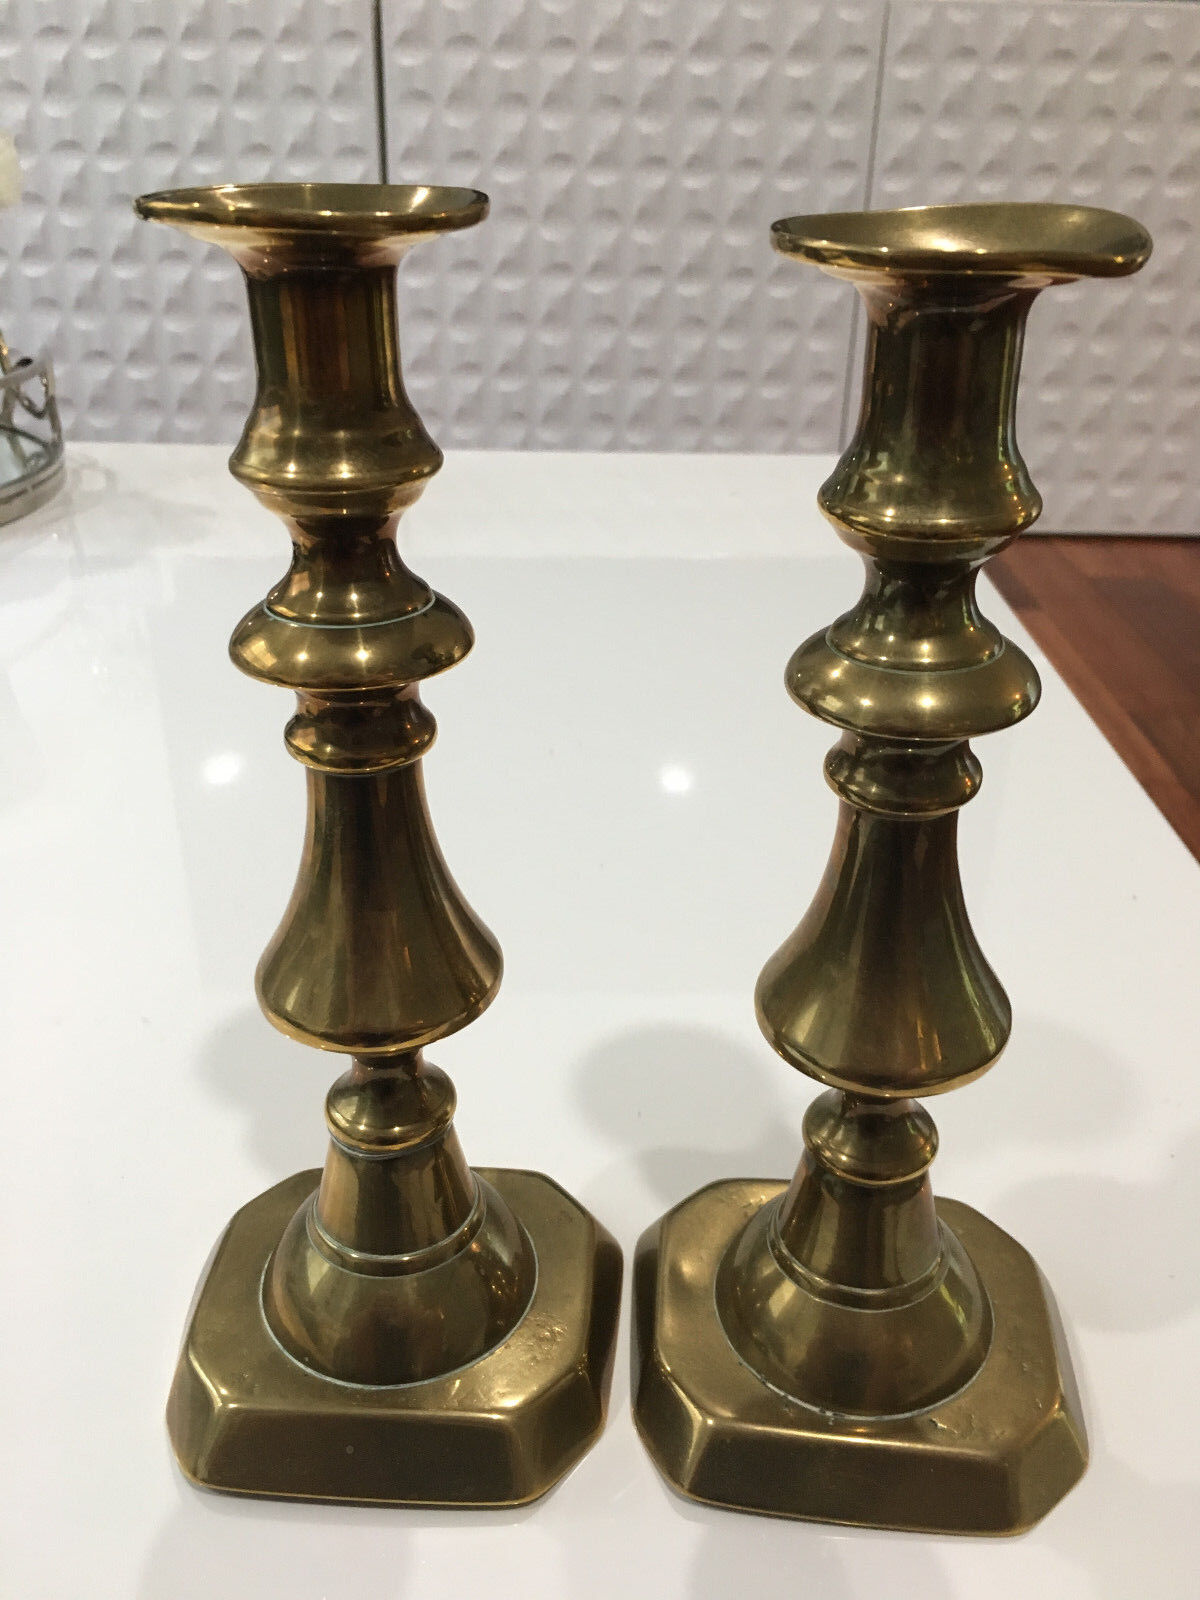 Antique 19th Century or Earlier Pair of Brass Candlesticks Candle Holders